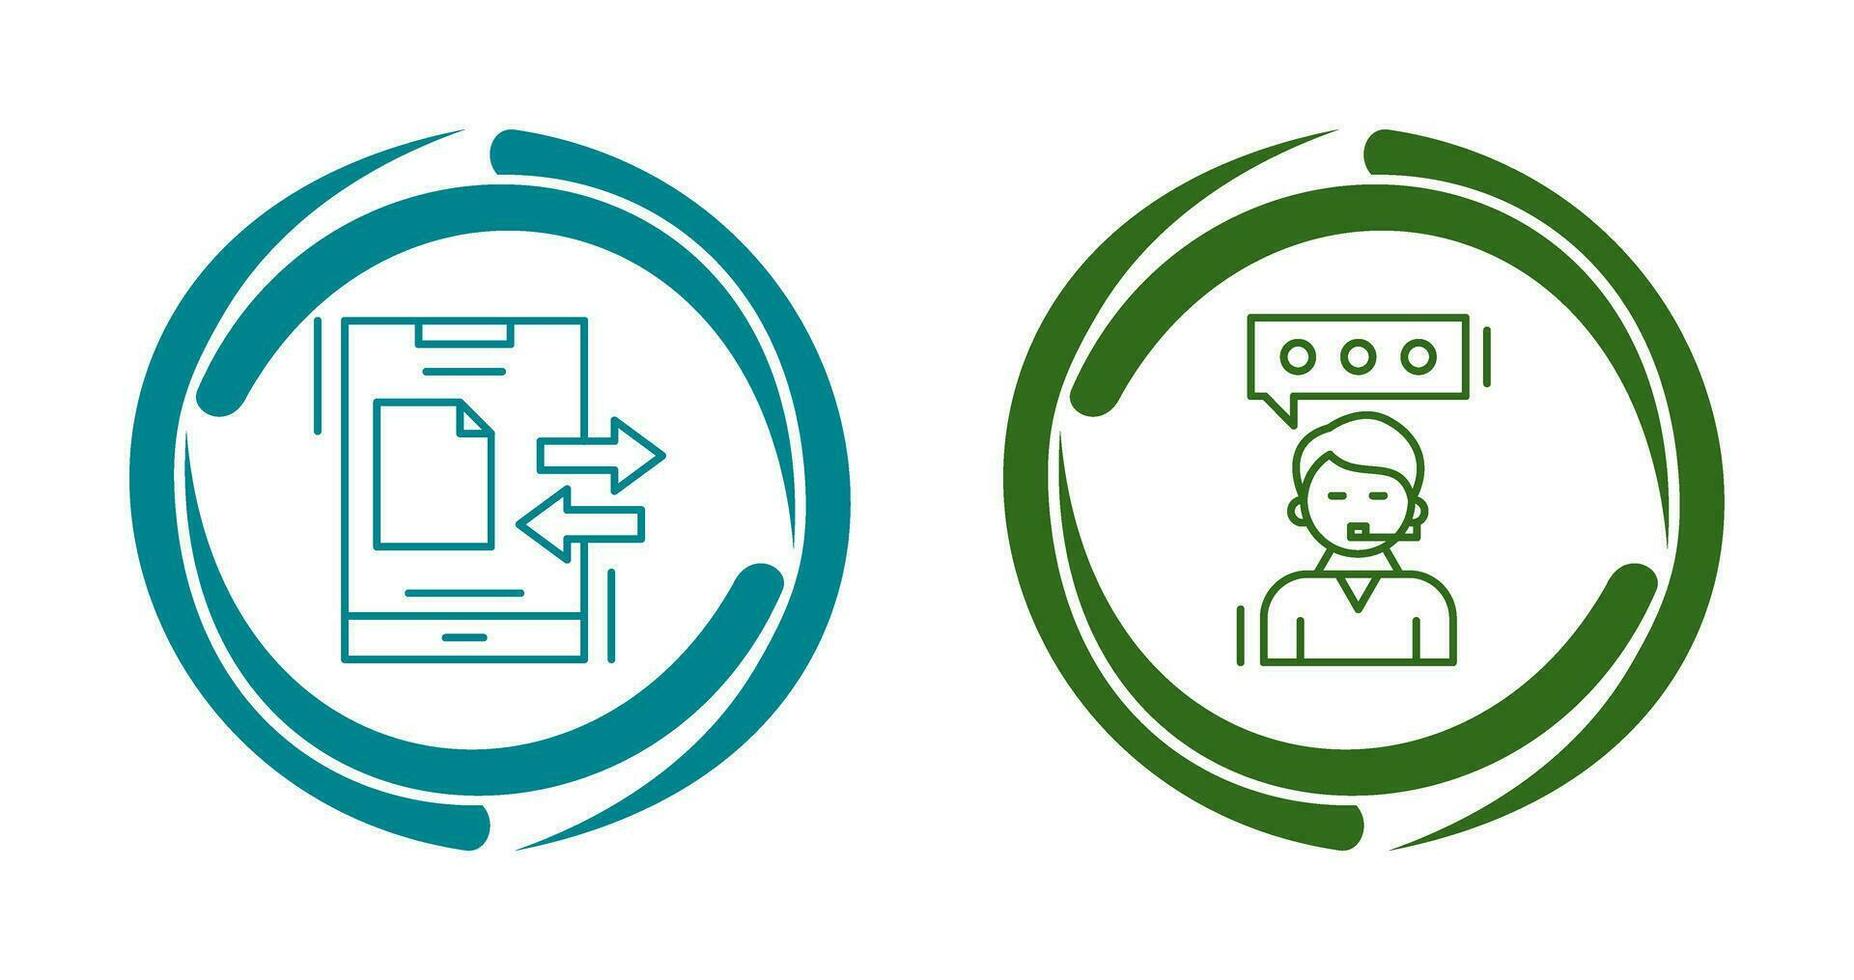 Data Transfer and Client Service Icon vector